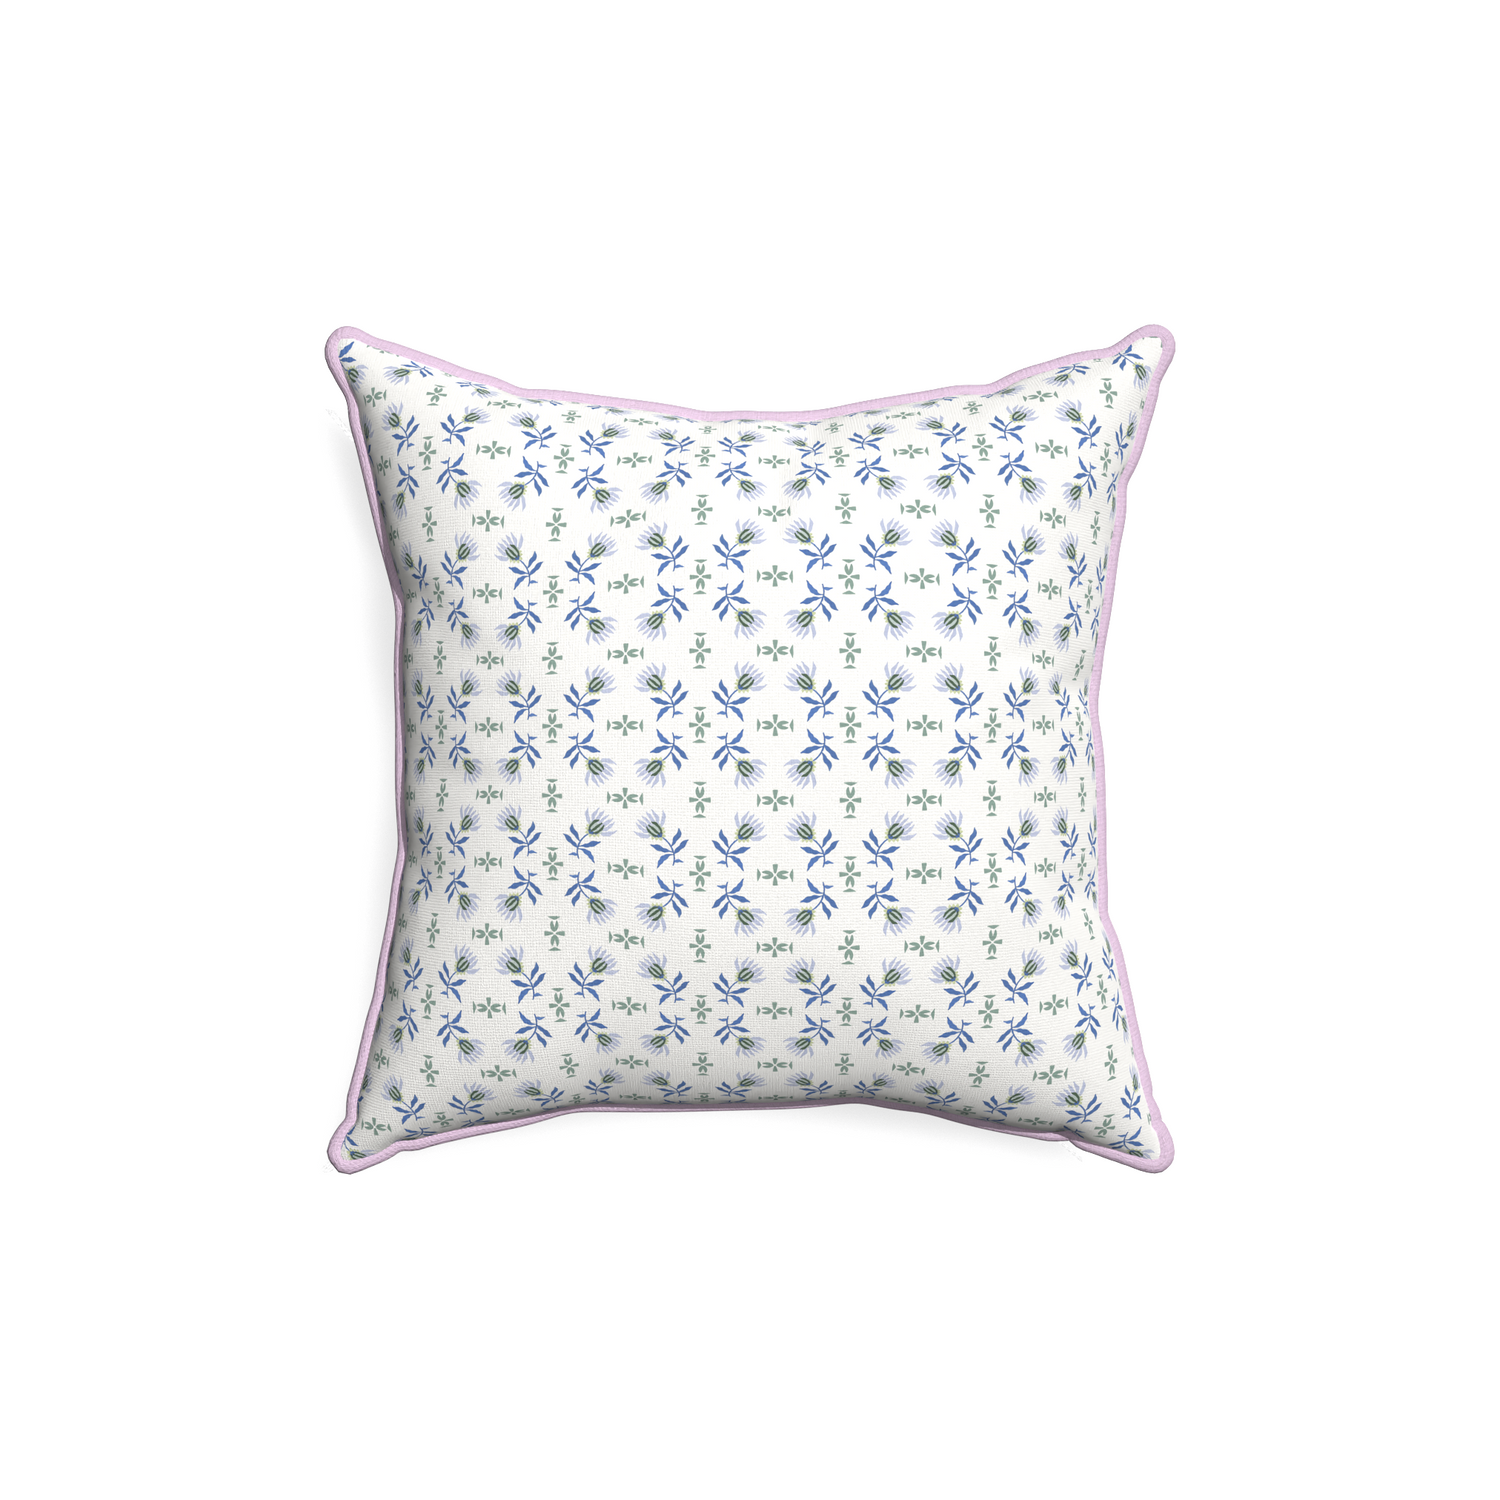 18-square lee custom pillow with l piping on white background